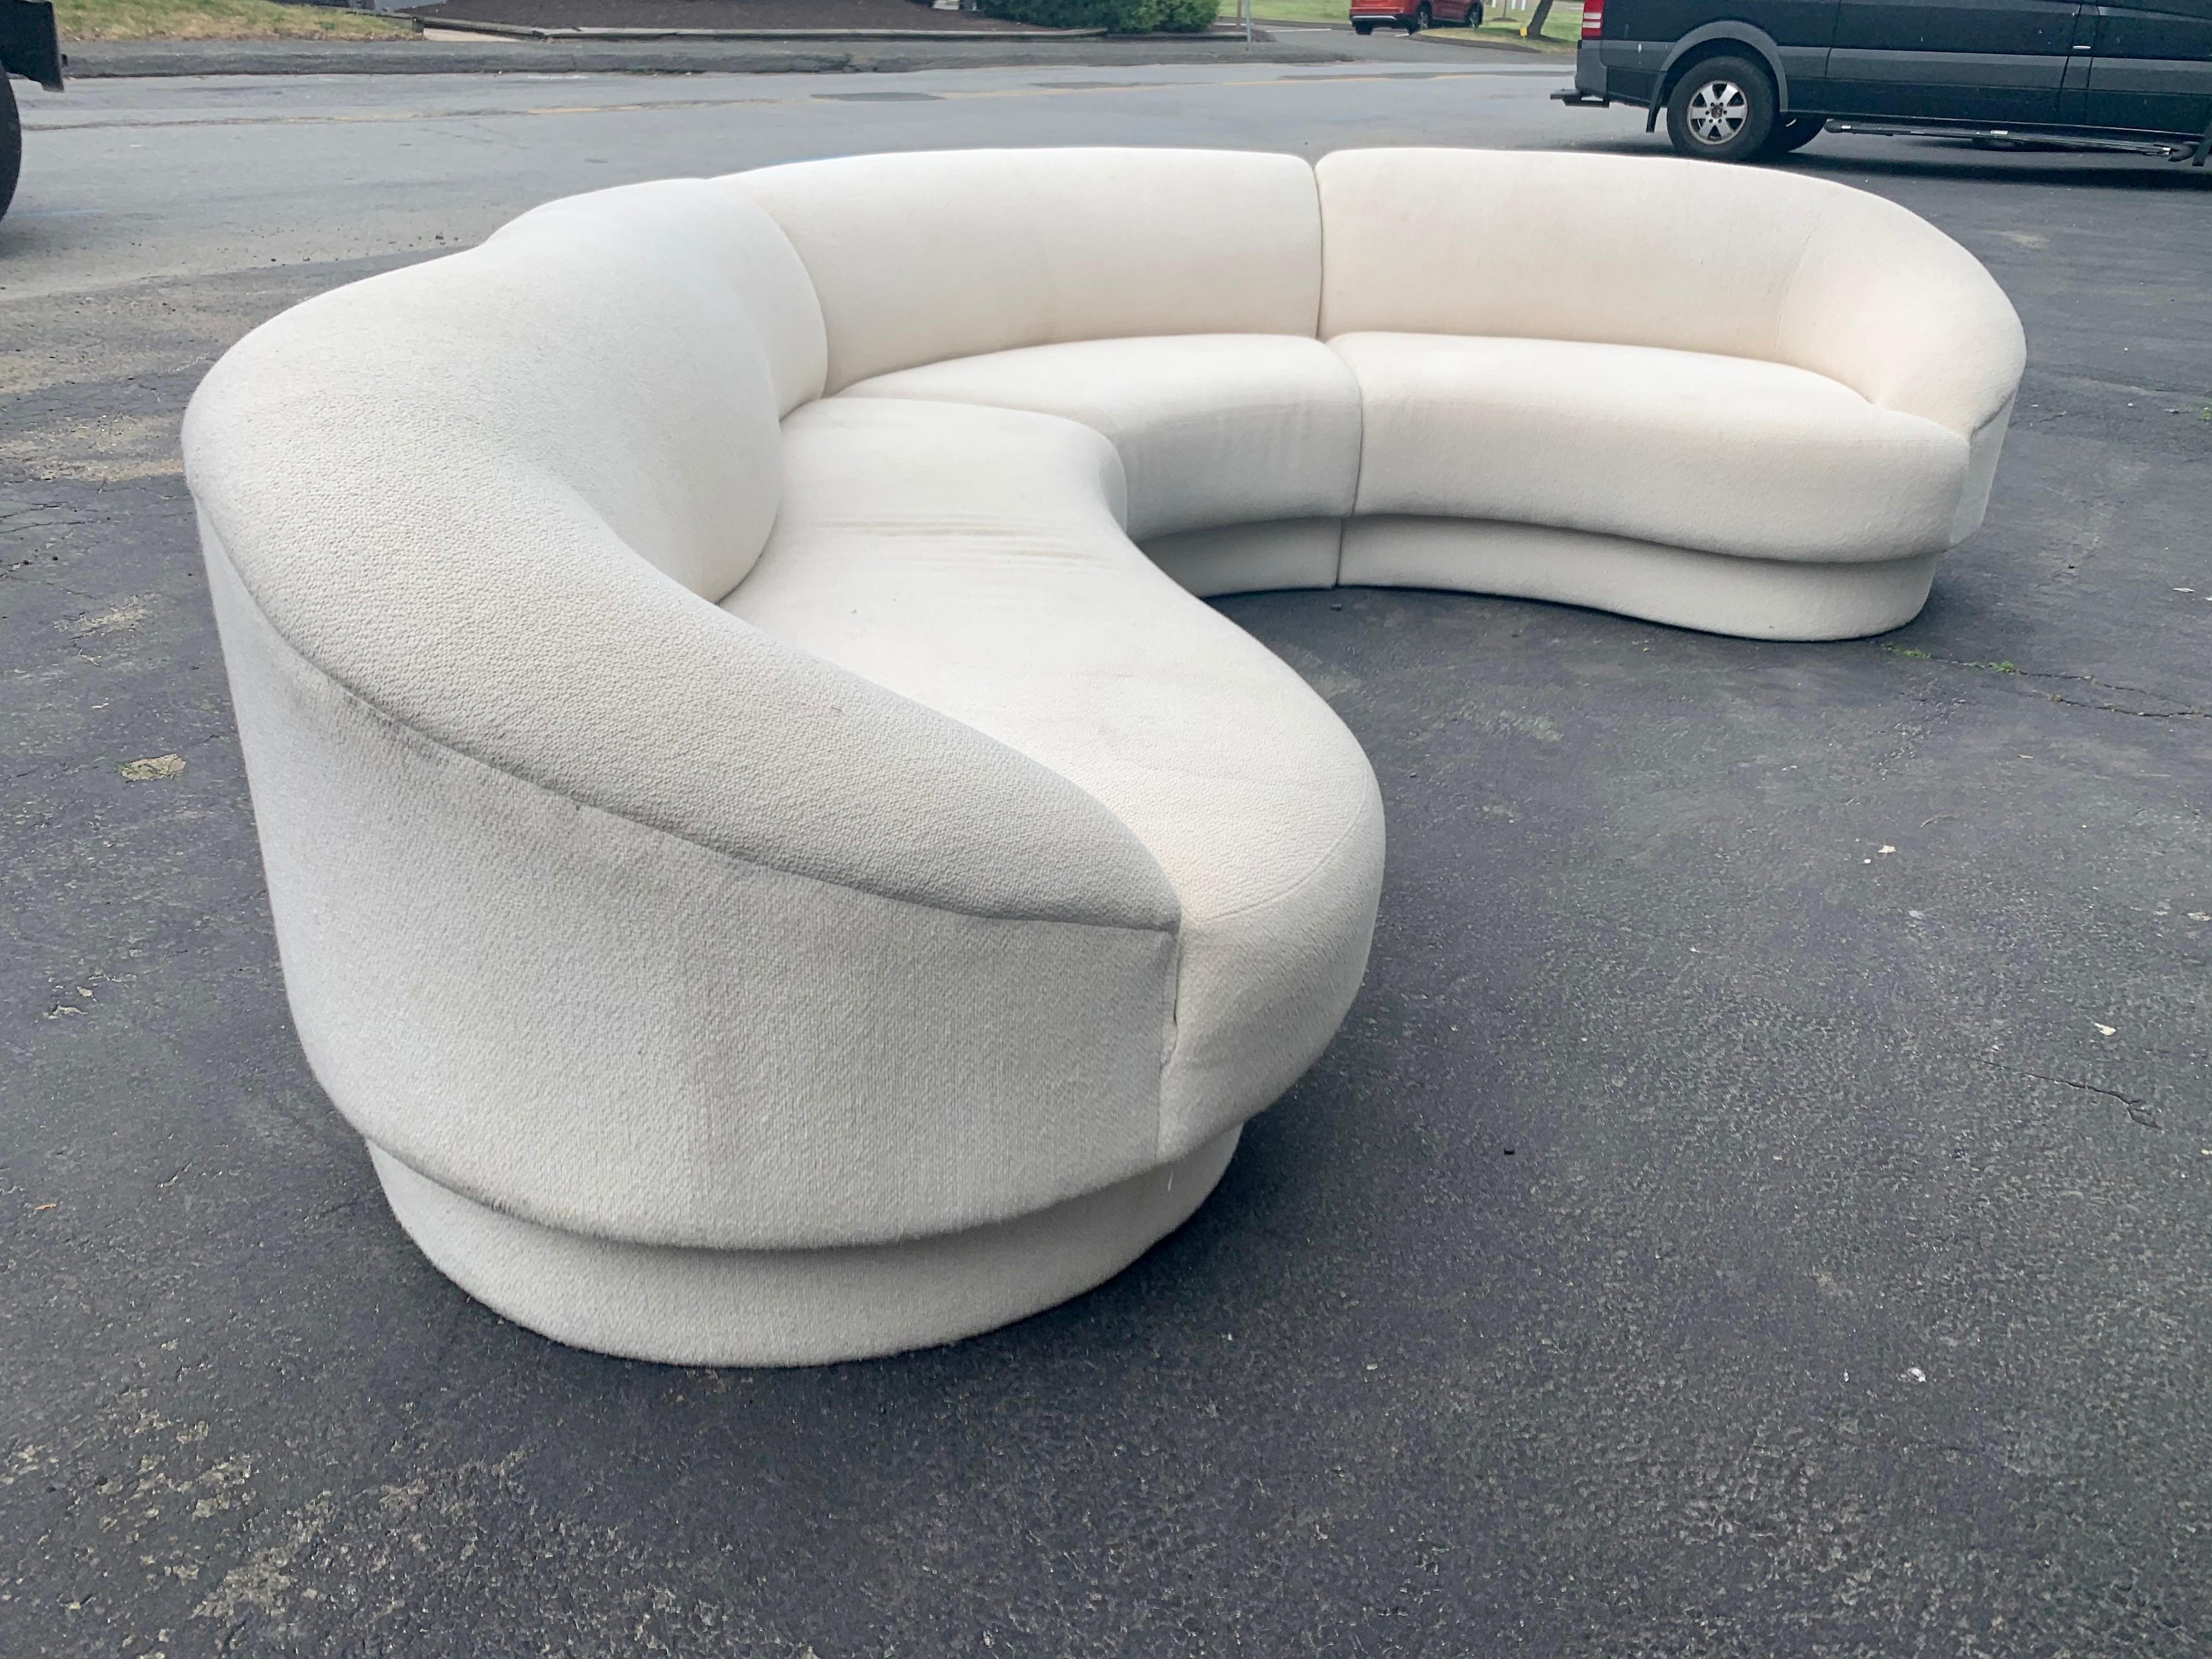 Weiman Furniture Kagan three piece modular sectional that was reupholstered seven years ago in a off-white
cotton fabric. That said, it needs to be reupholstered again by the new owner as there are stains in several areas (see pics) as well as son